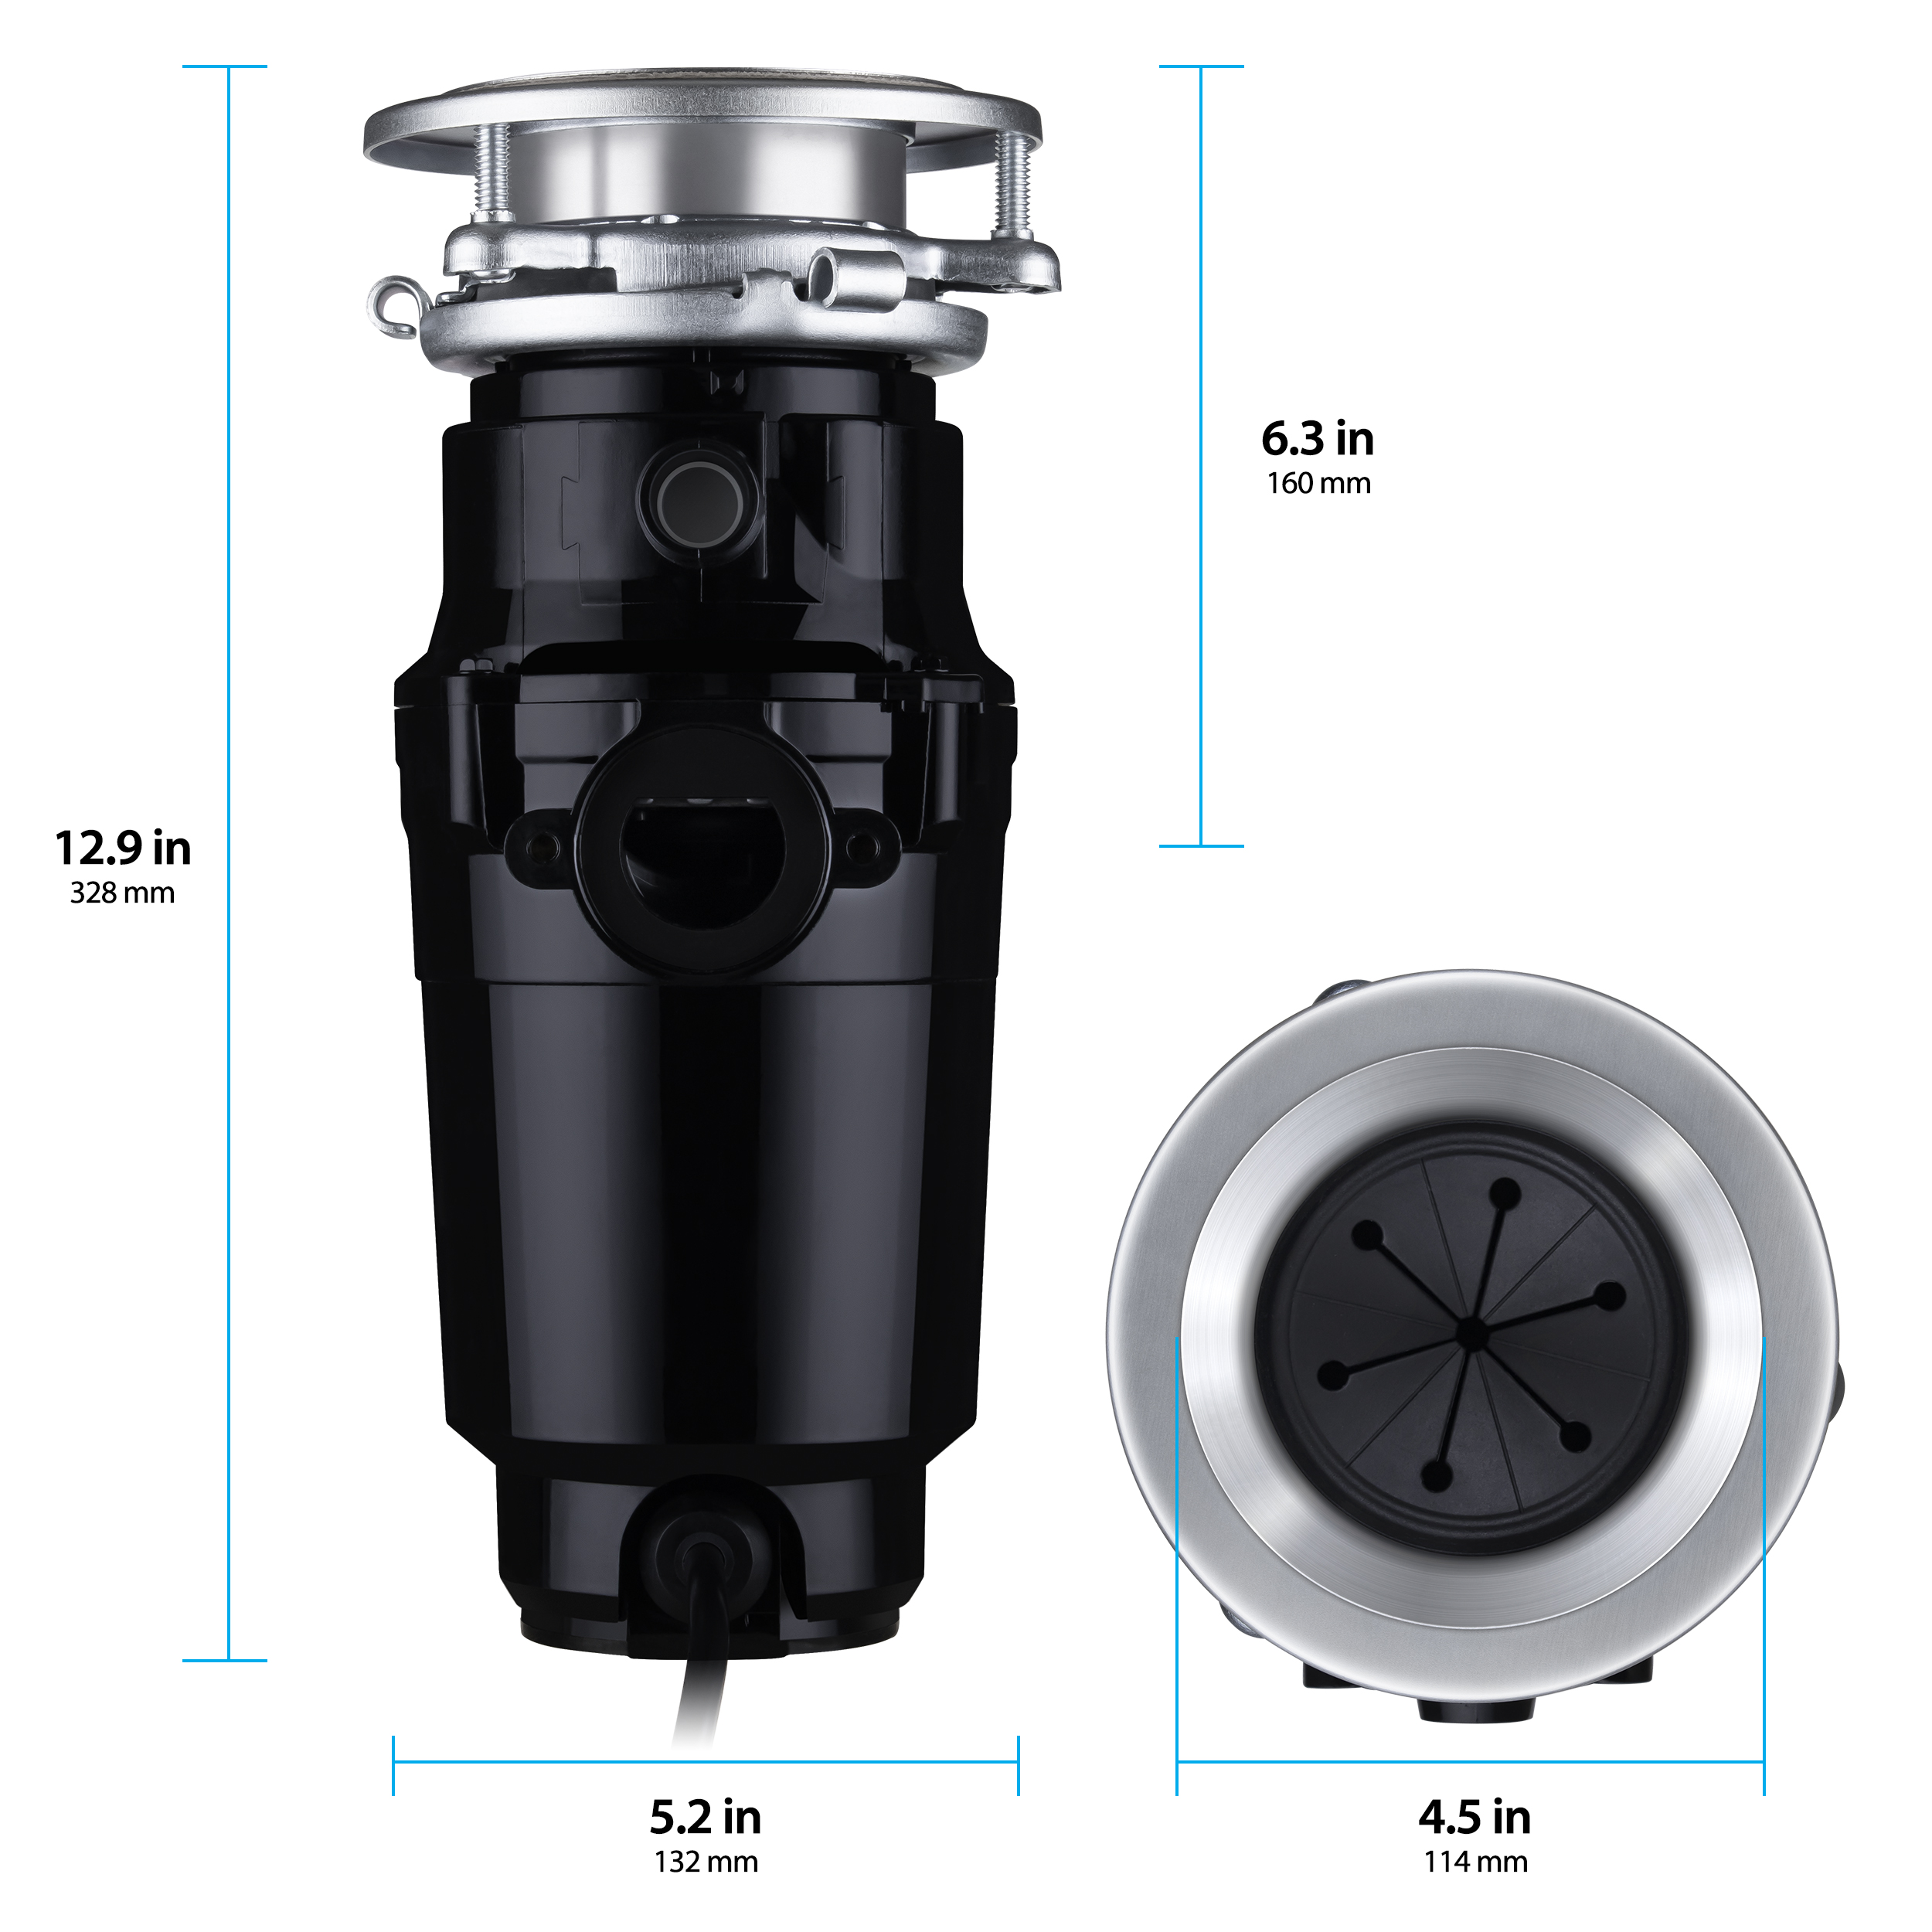 Eco Logic 1/3 HP Garbage Disposal, Continuous Feed Disposer, Attached Power  Cord 10-US-EL-4-3B